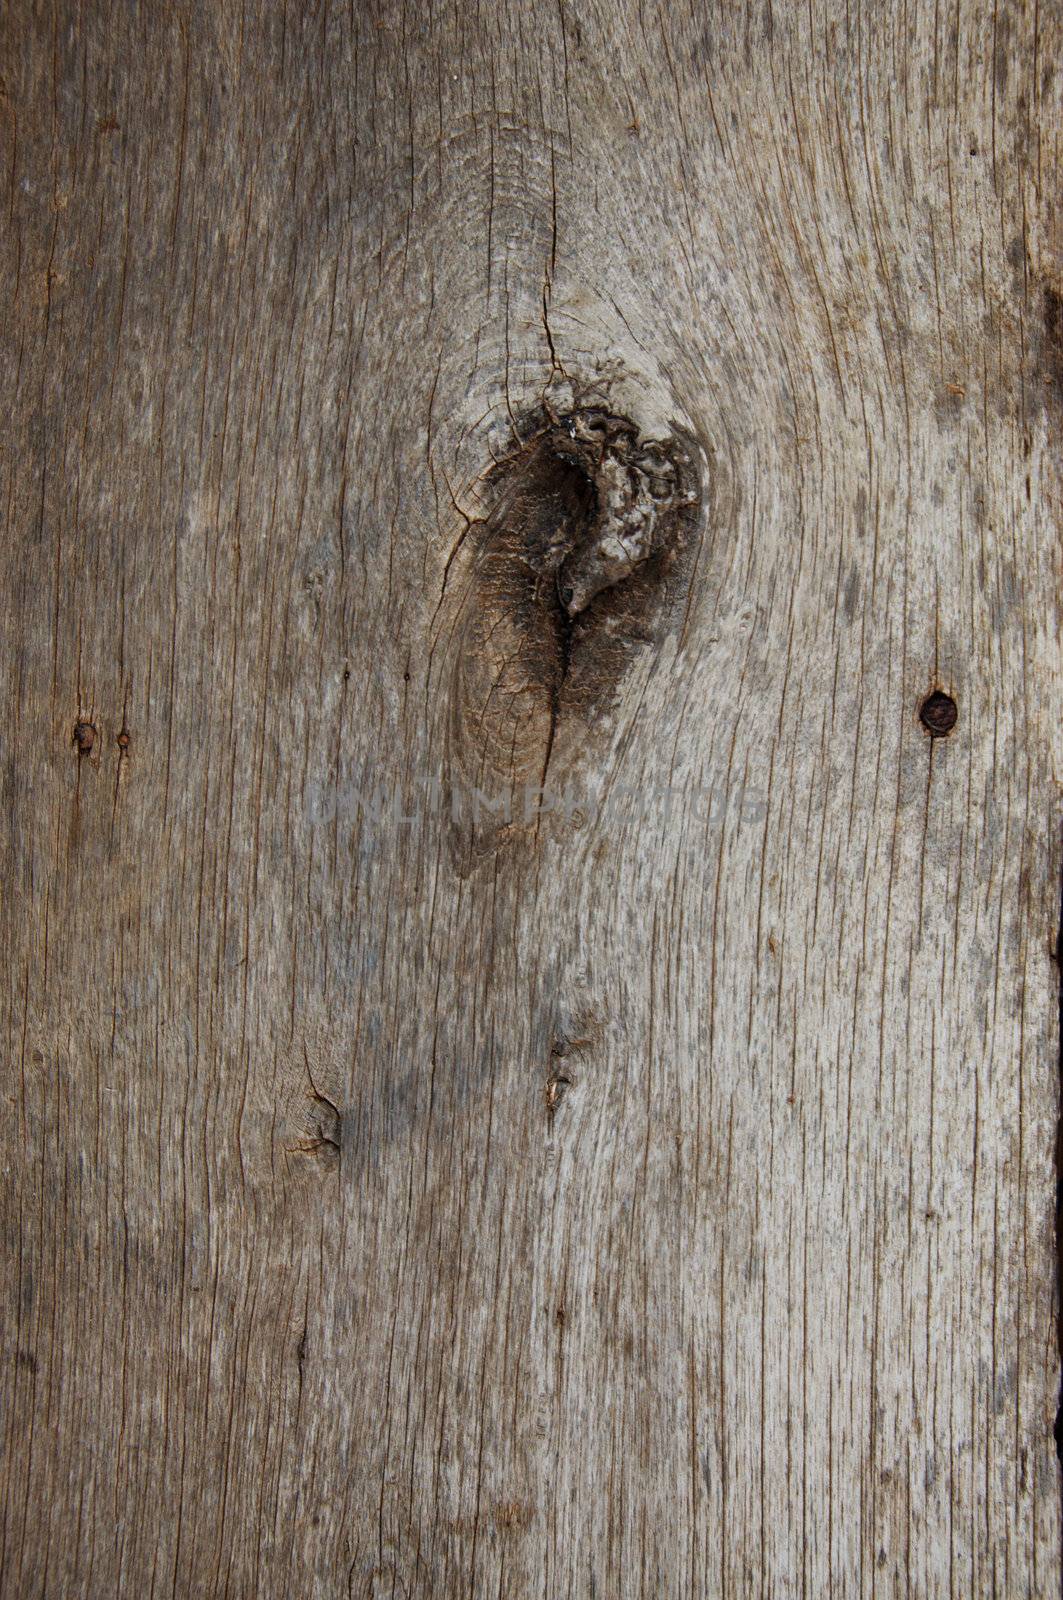 Wood texture background for design